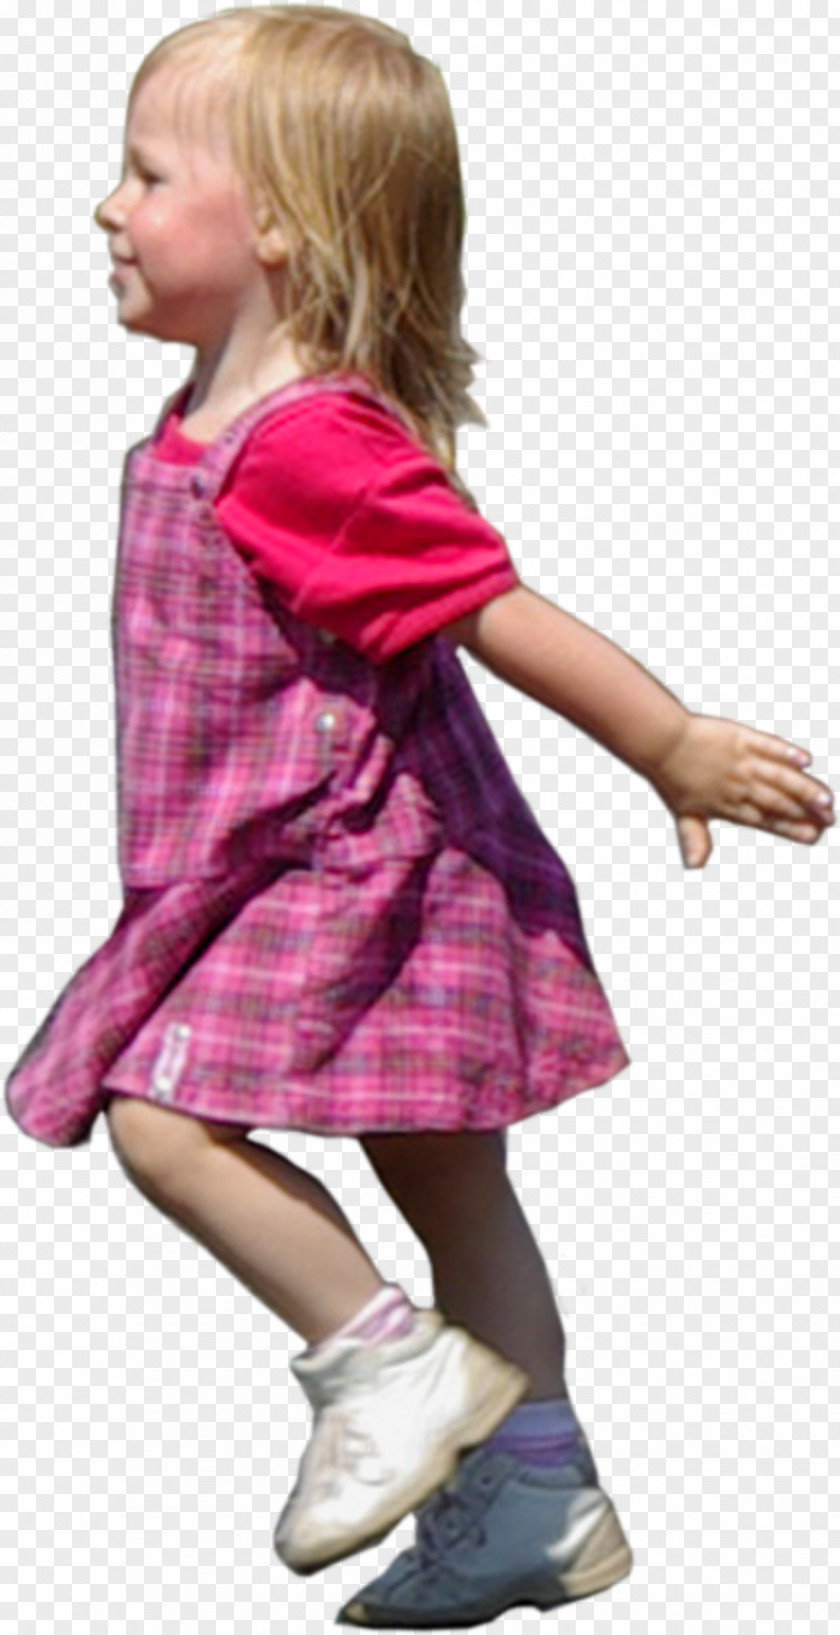 Girls Child Woman Infant PNG